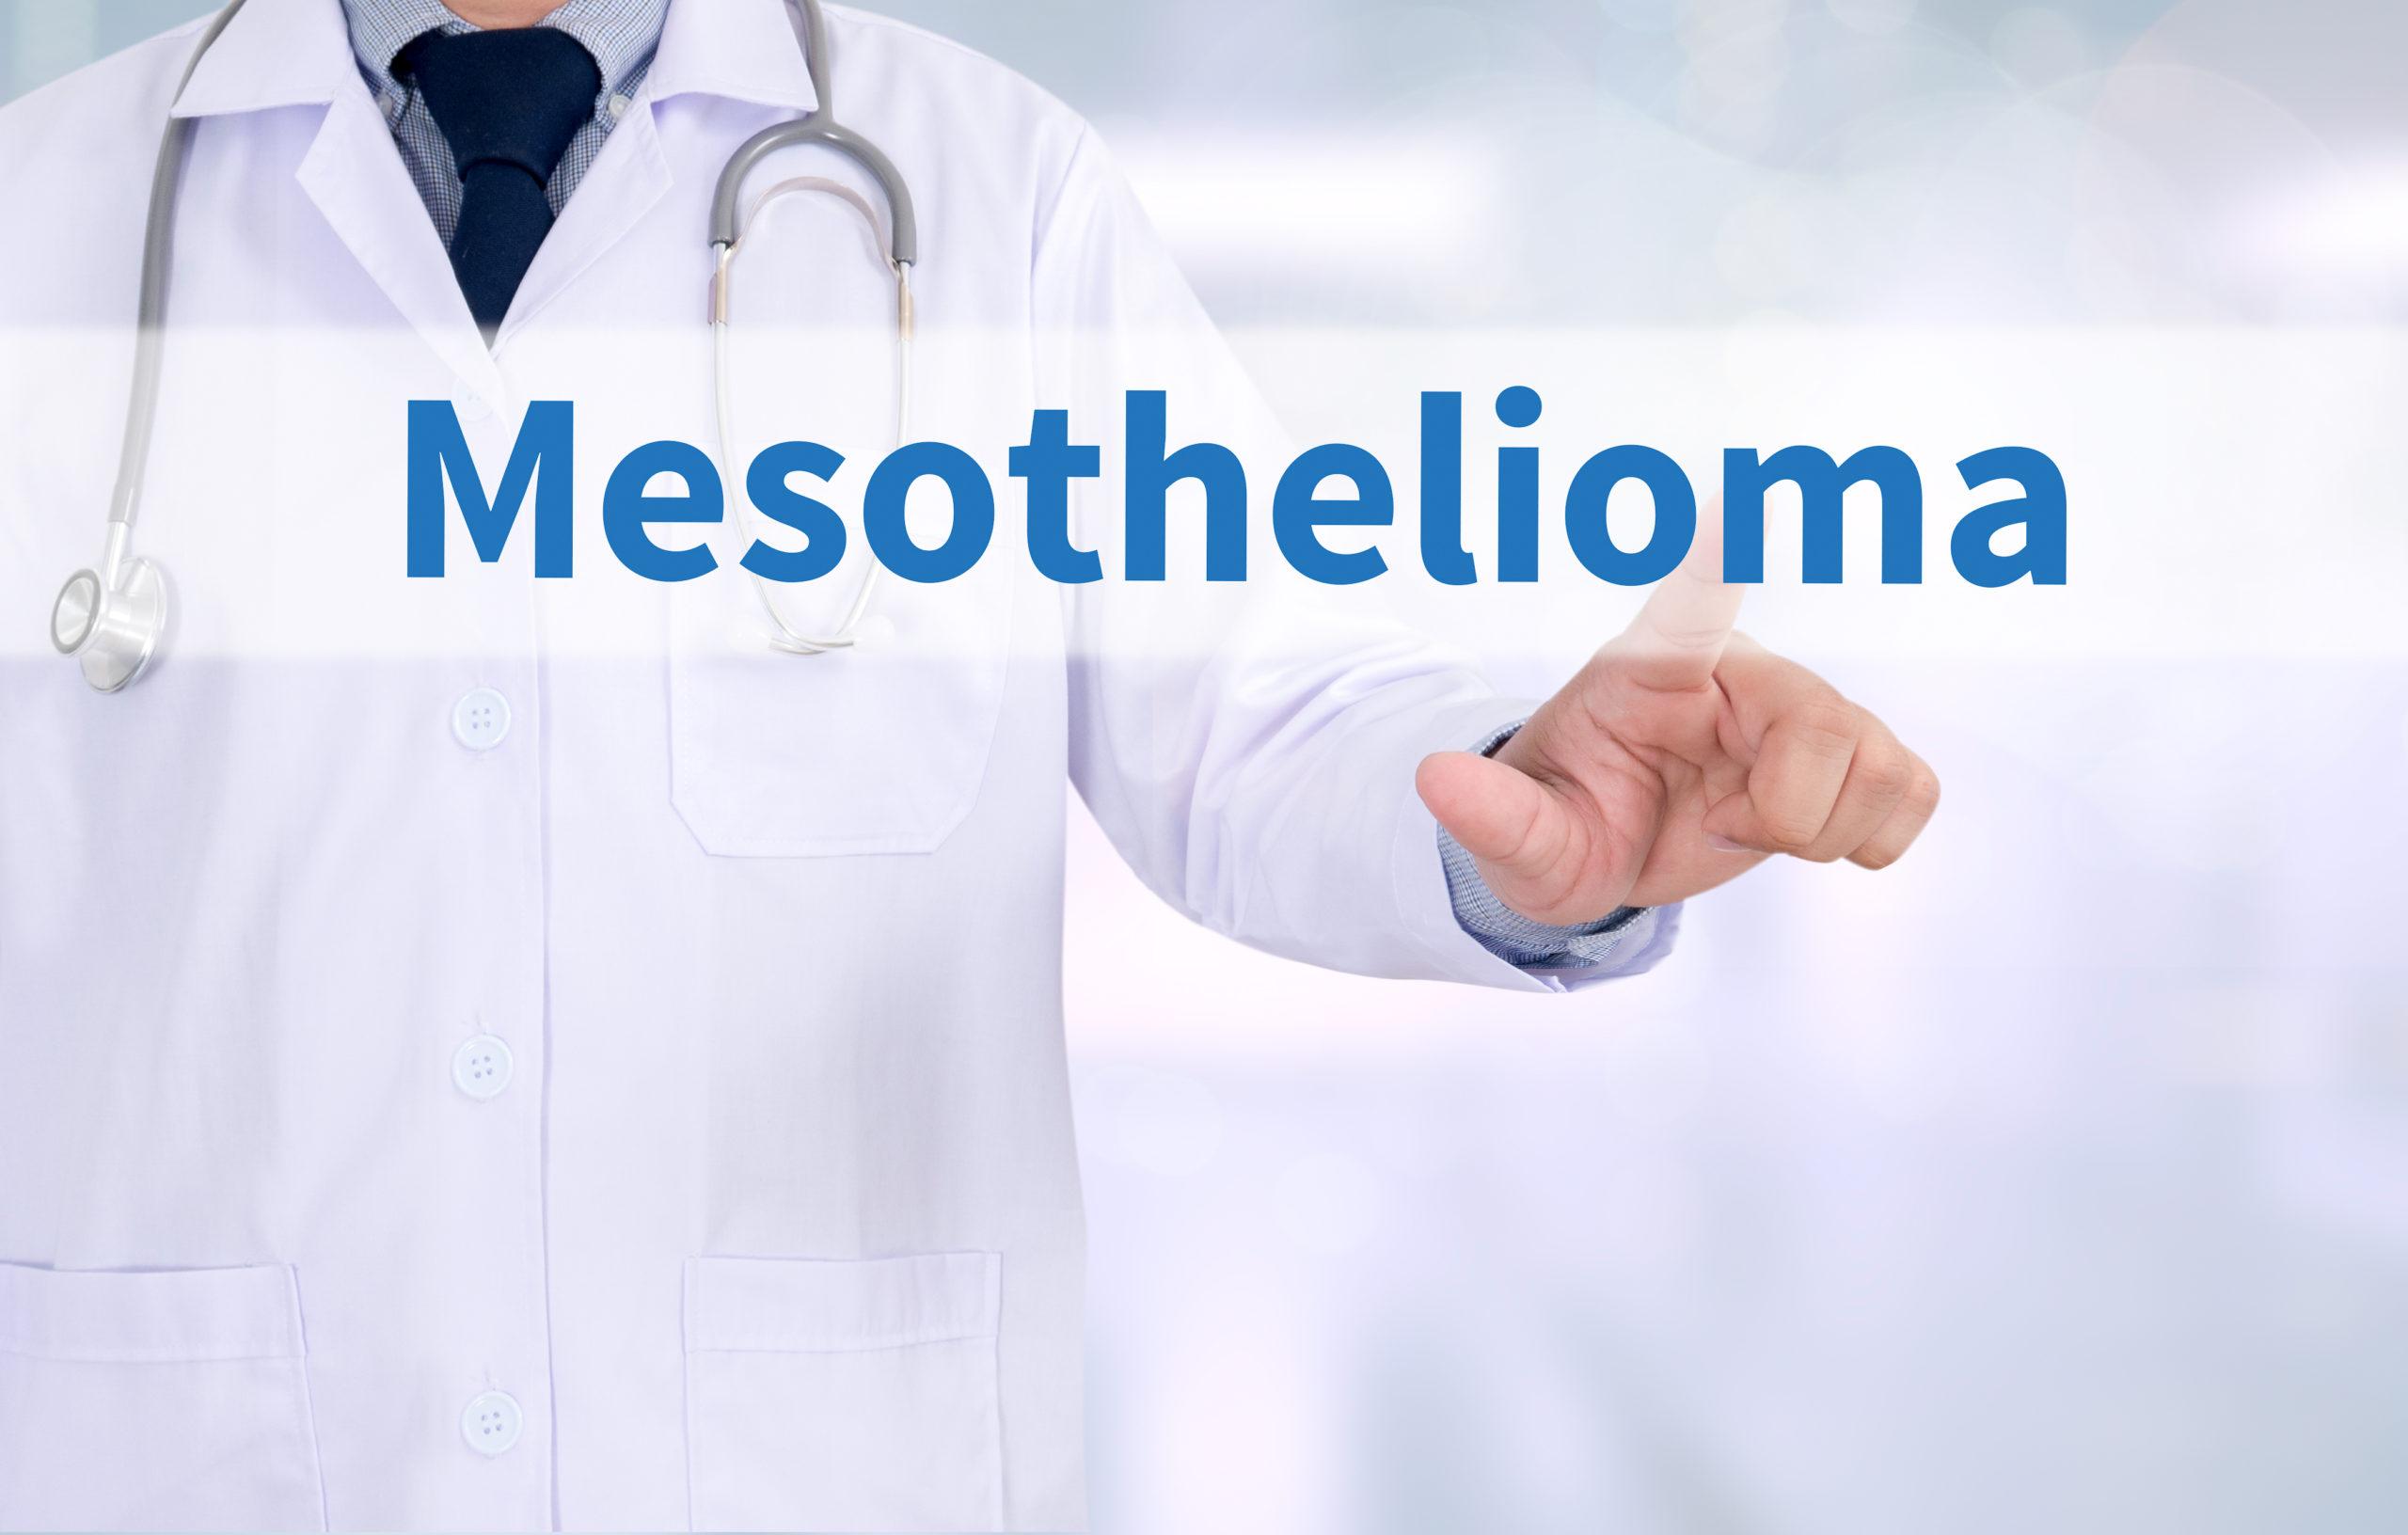 What is the main cause of mesothelioma?